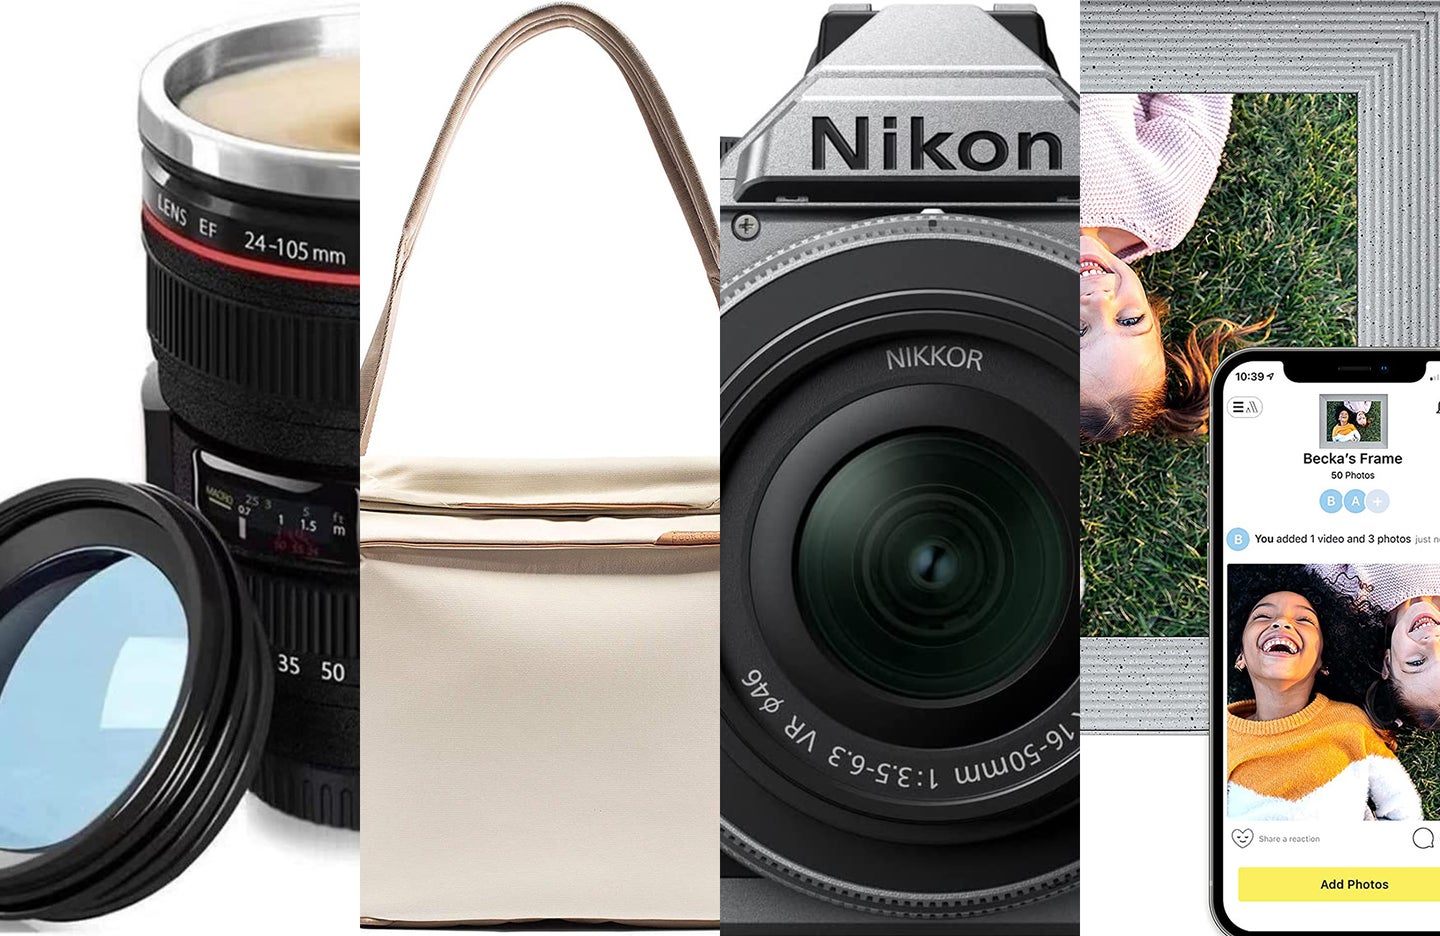 The best gifts for moms